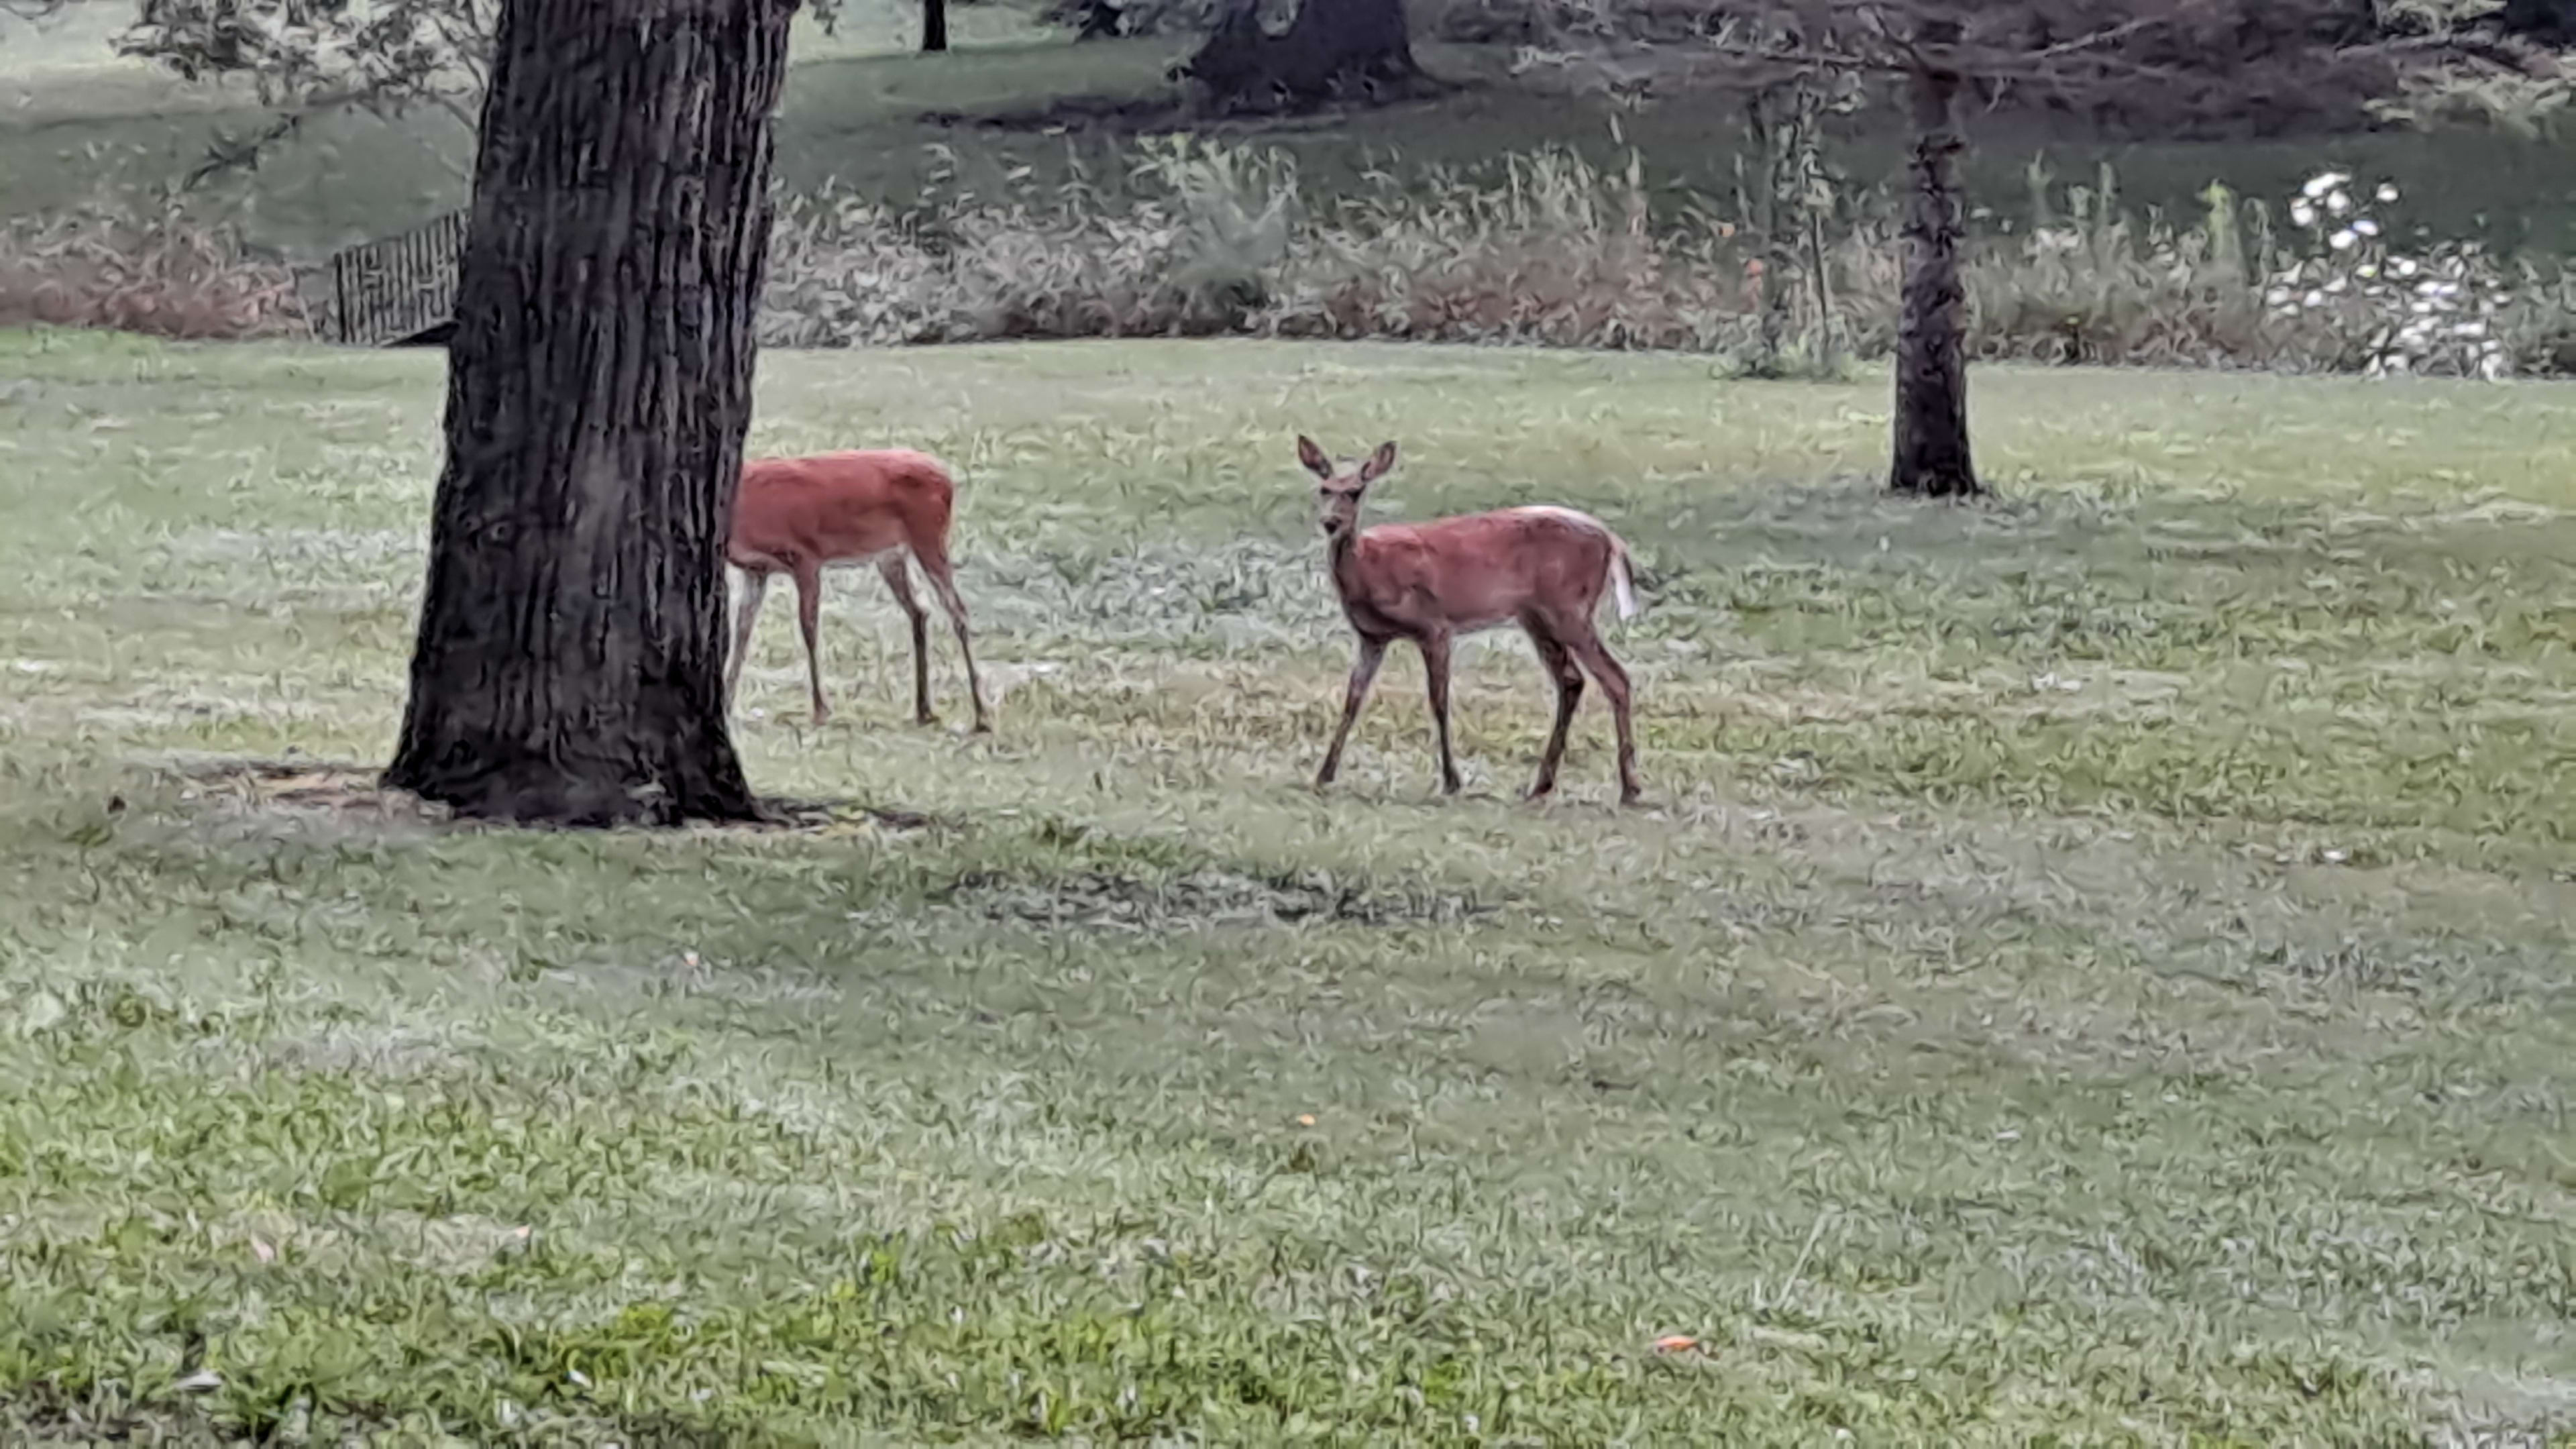 Deer just strolling around campsite this morning.